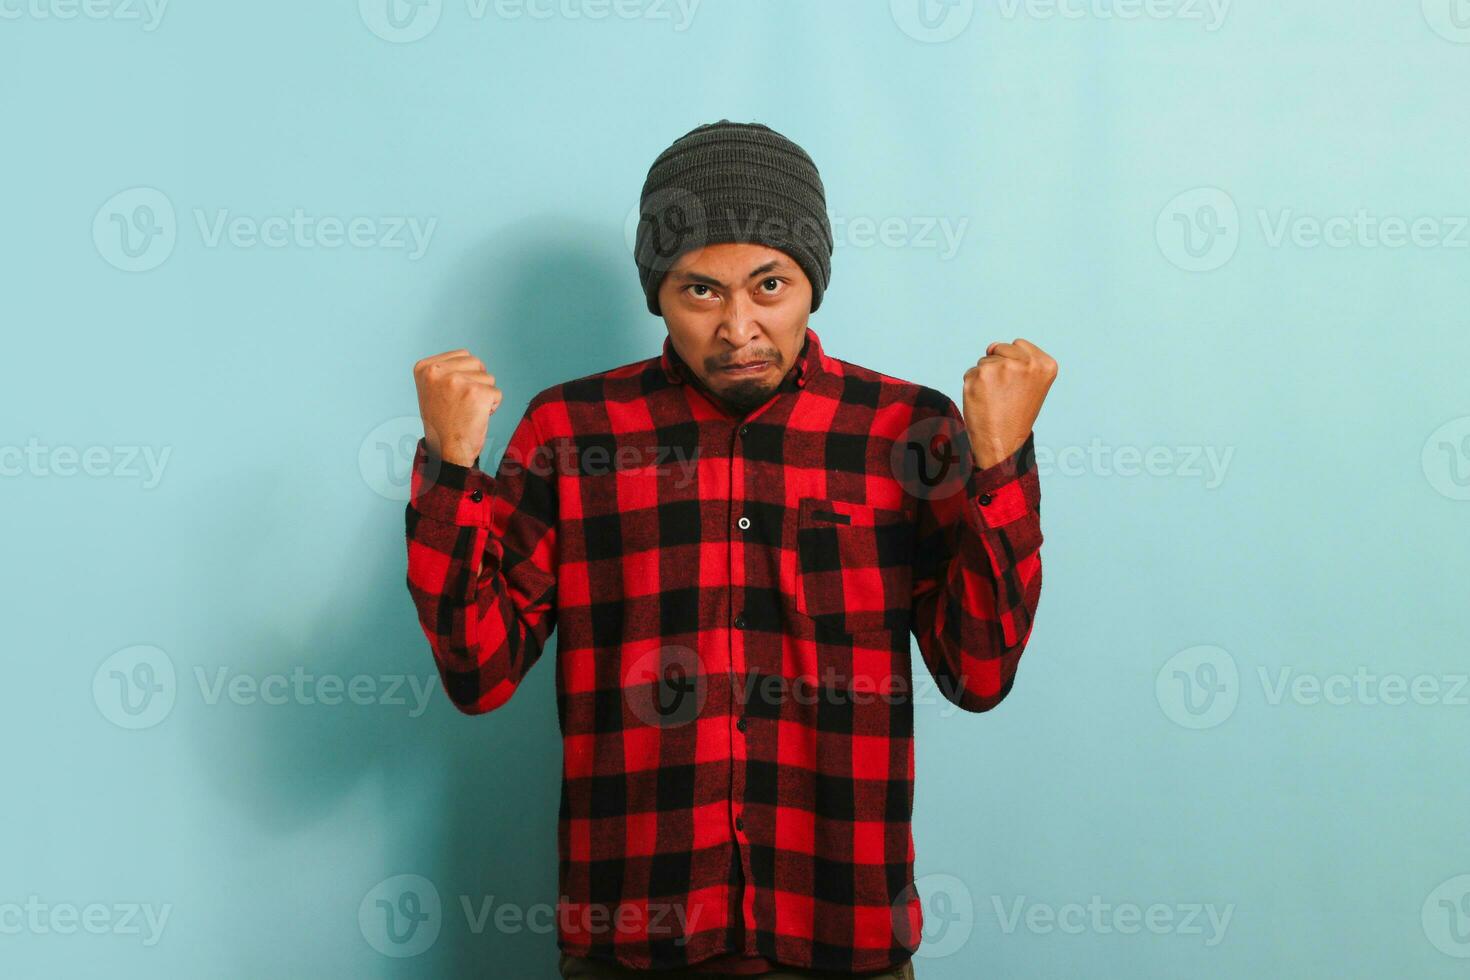 A furious young Asian man with a beanie hat and a red plaid flannel shirt raises his fist and looks angrily at the camera, displaying frustration. He is isolated on a blue background photo